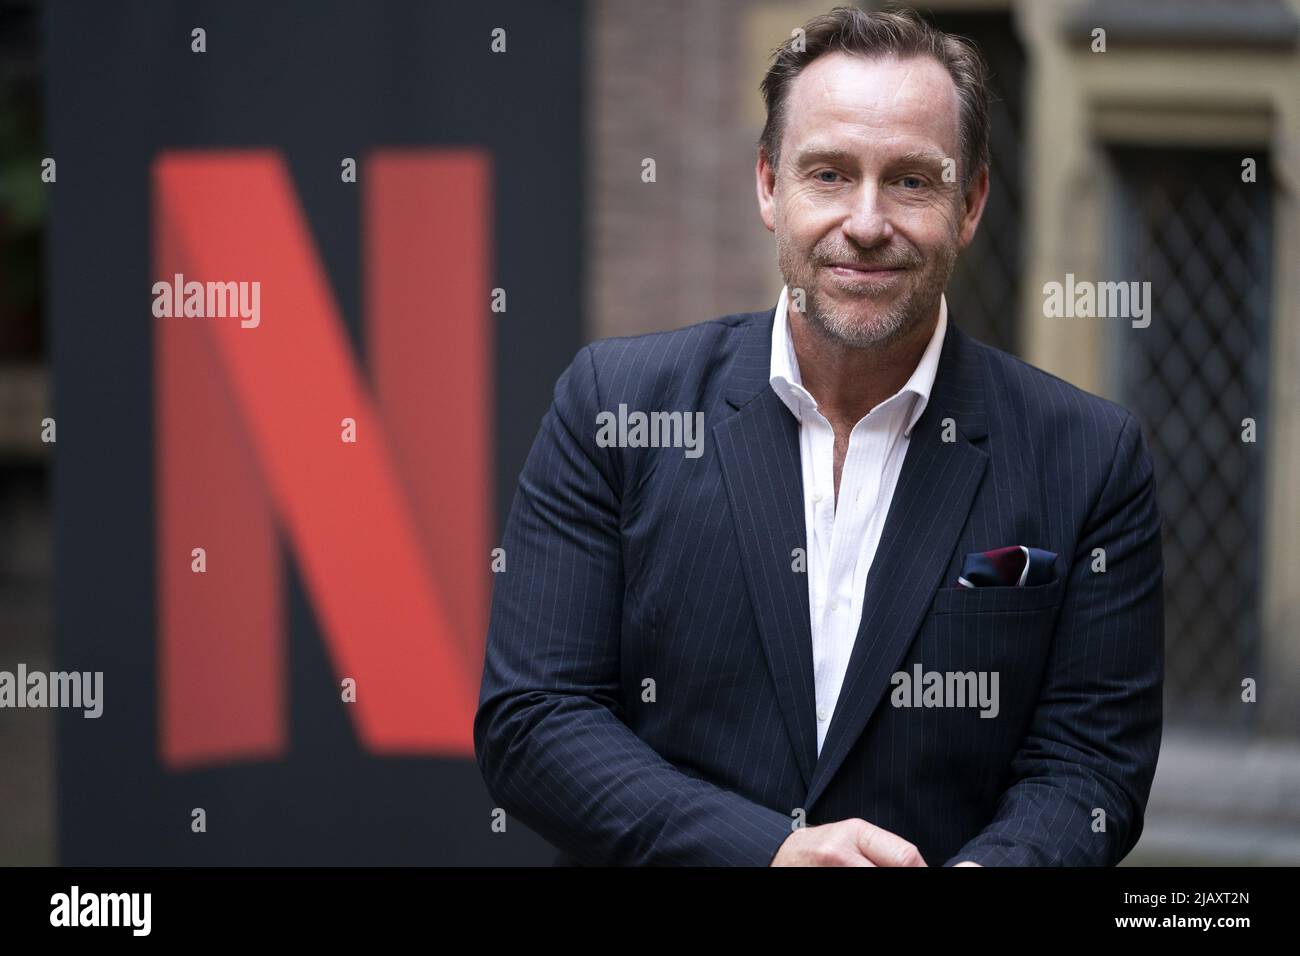 2022-06-01 18:50:10 THE HAGUE - Portrait of Adam Price, screenwriter of the Netflix hit series Borgen. ANP JEROEN JUMELET netherlands out - belgium out Stock Photo